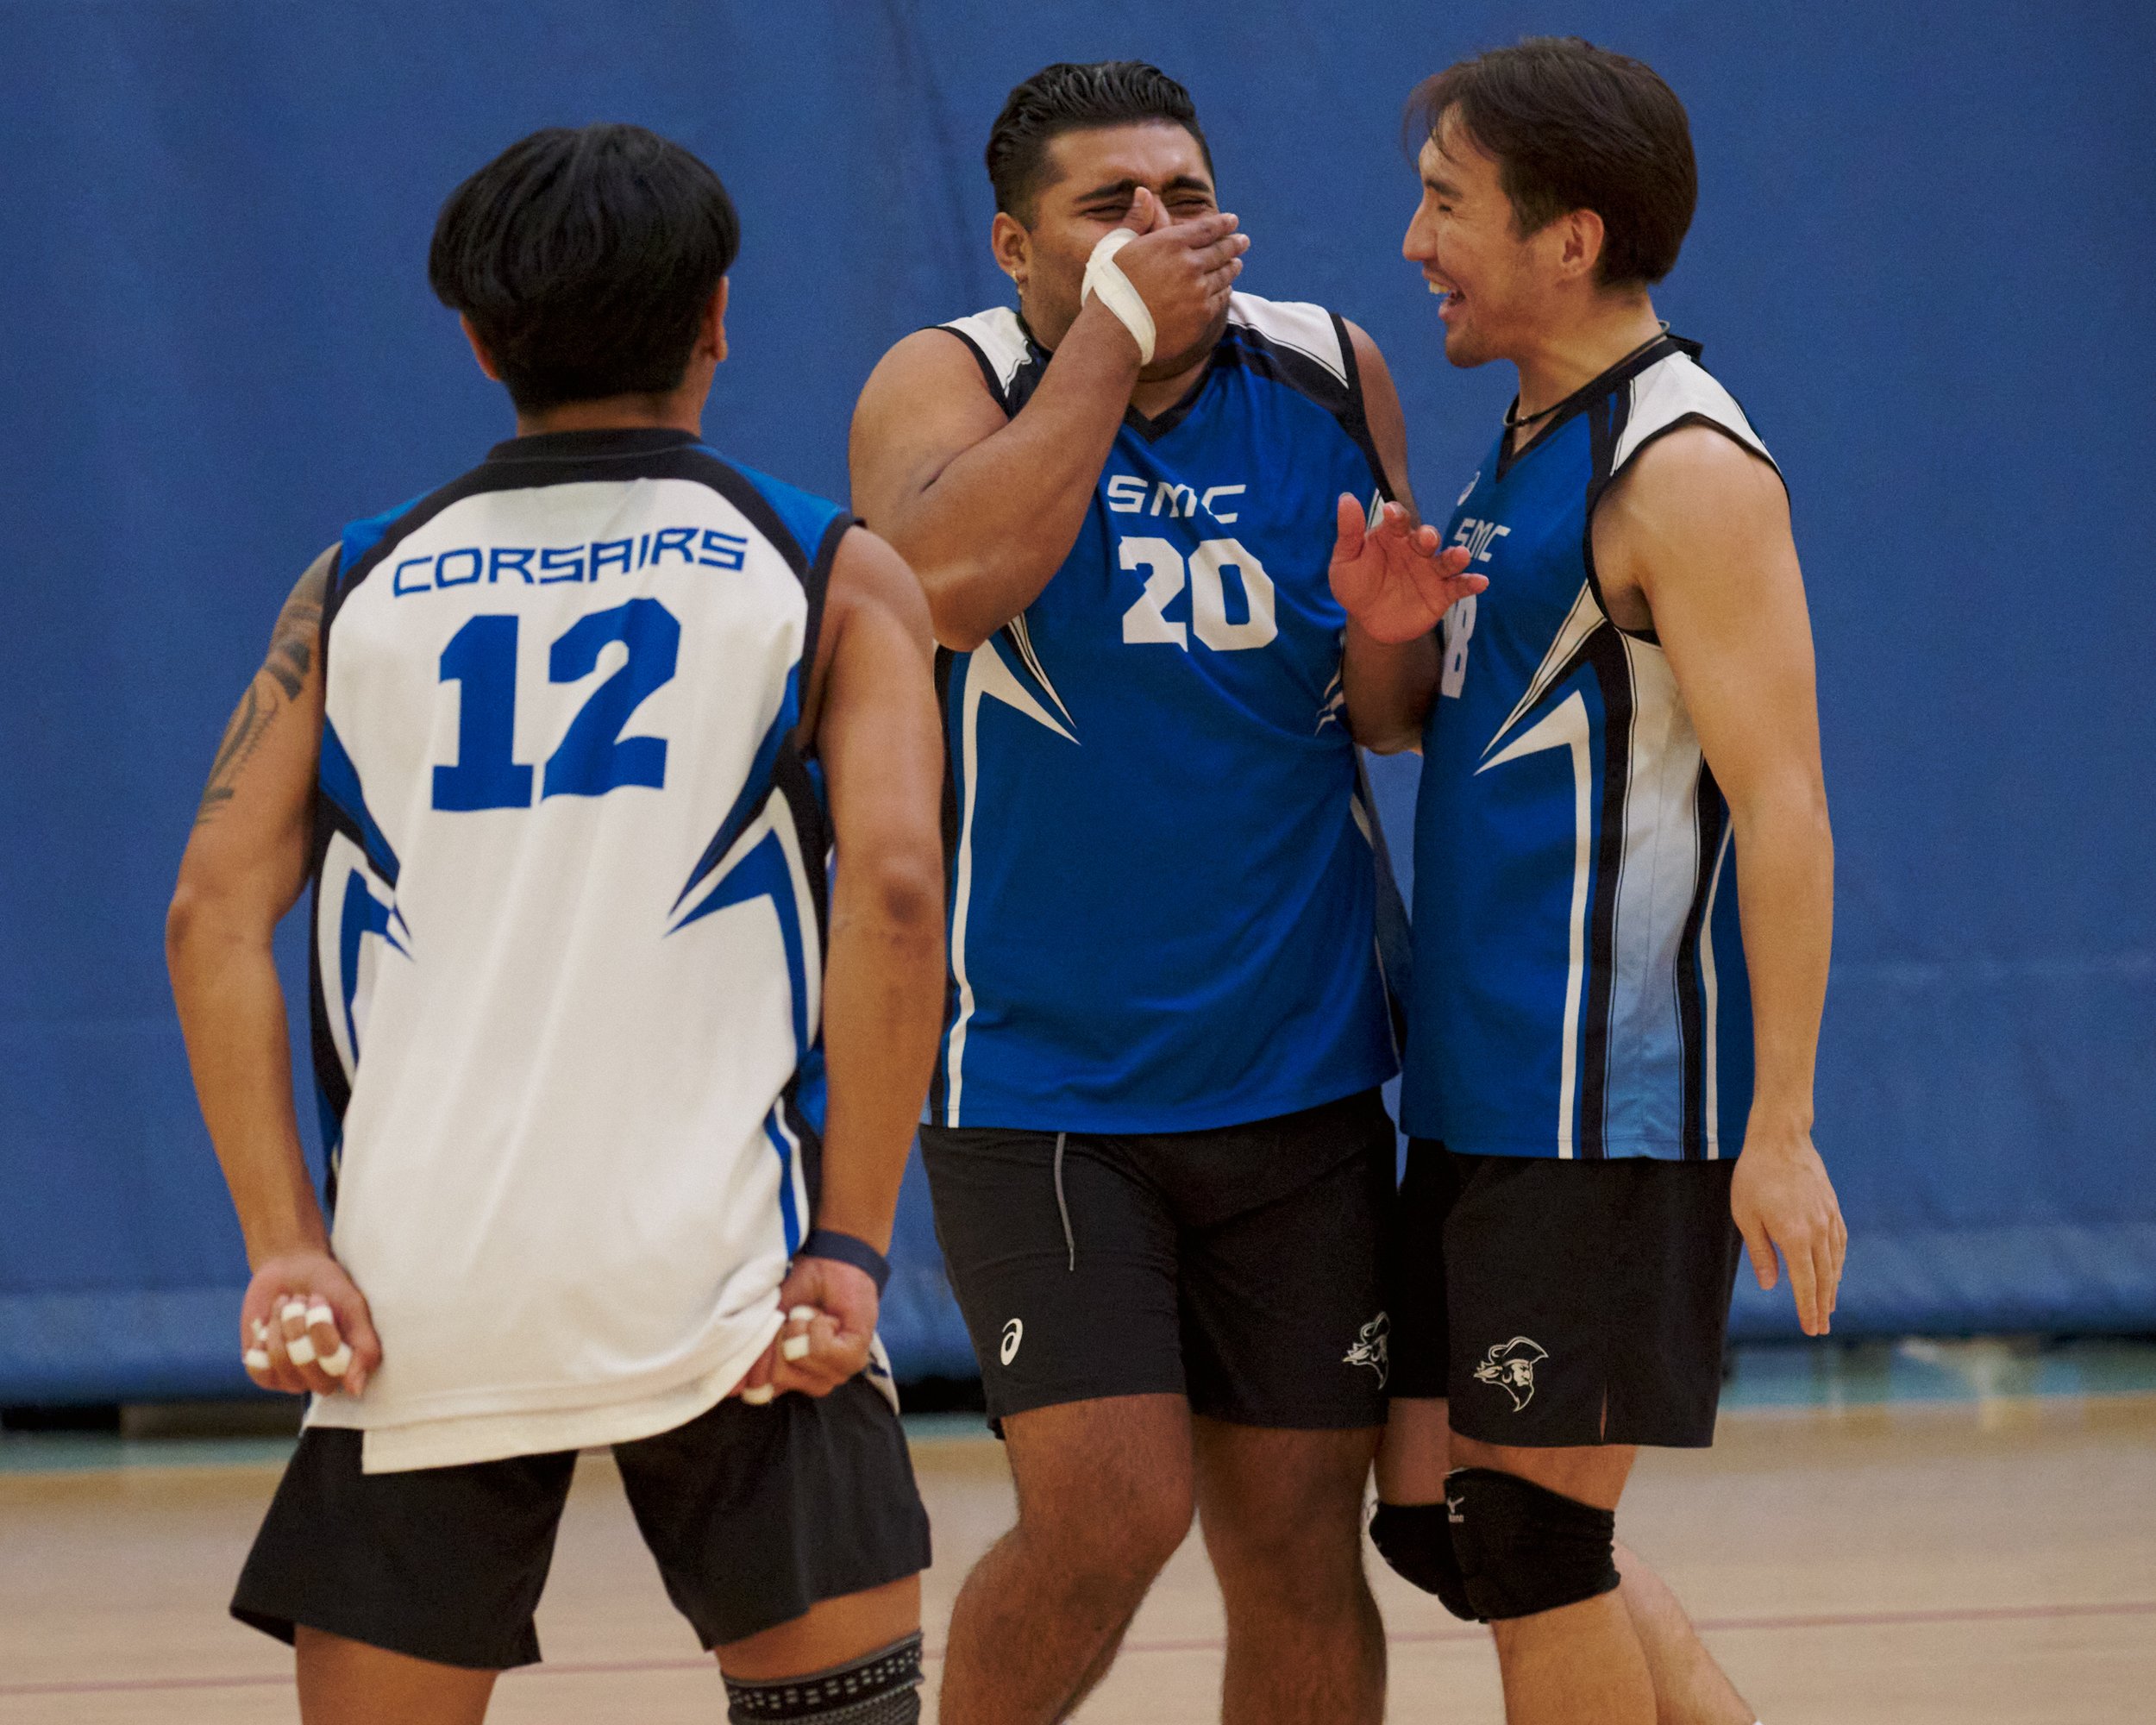  Santa Monica College Corsairs' Tylus Williams, Sergio Carrera, and Enkhtur Tserendavaa during the men's volleyball match against the Grossmont College Griffins on Wednesday, Feb. 15, 2023, at Corsair Gym in Santa Monica, Calif. The Corsairs won 3-0.